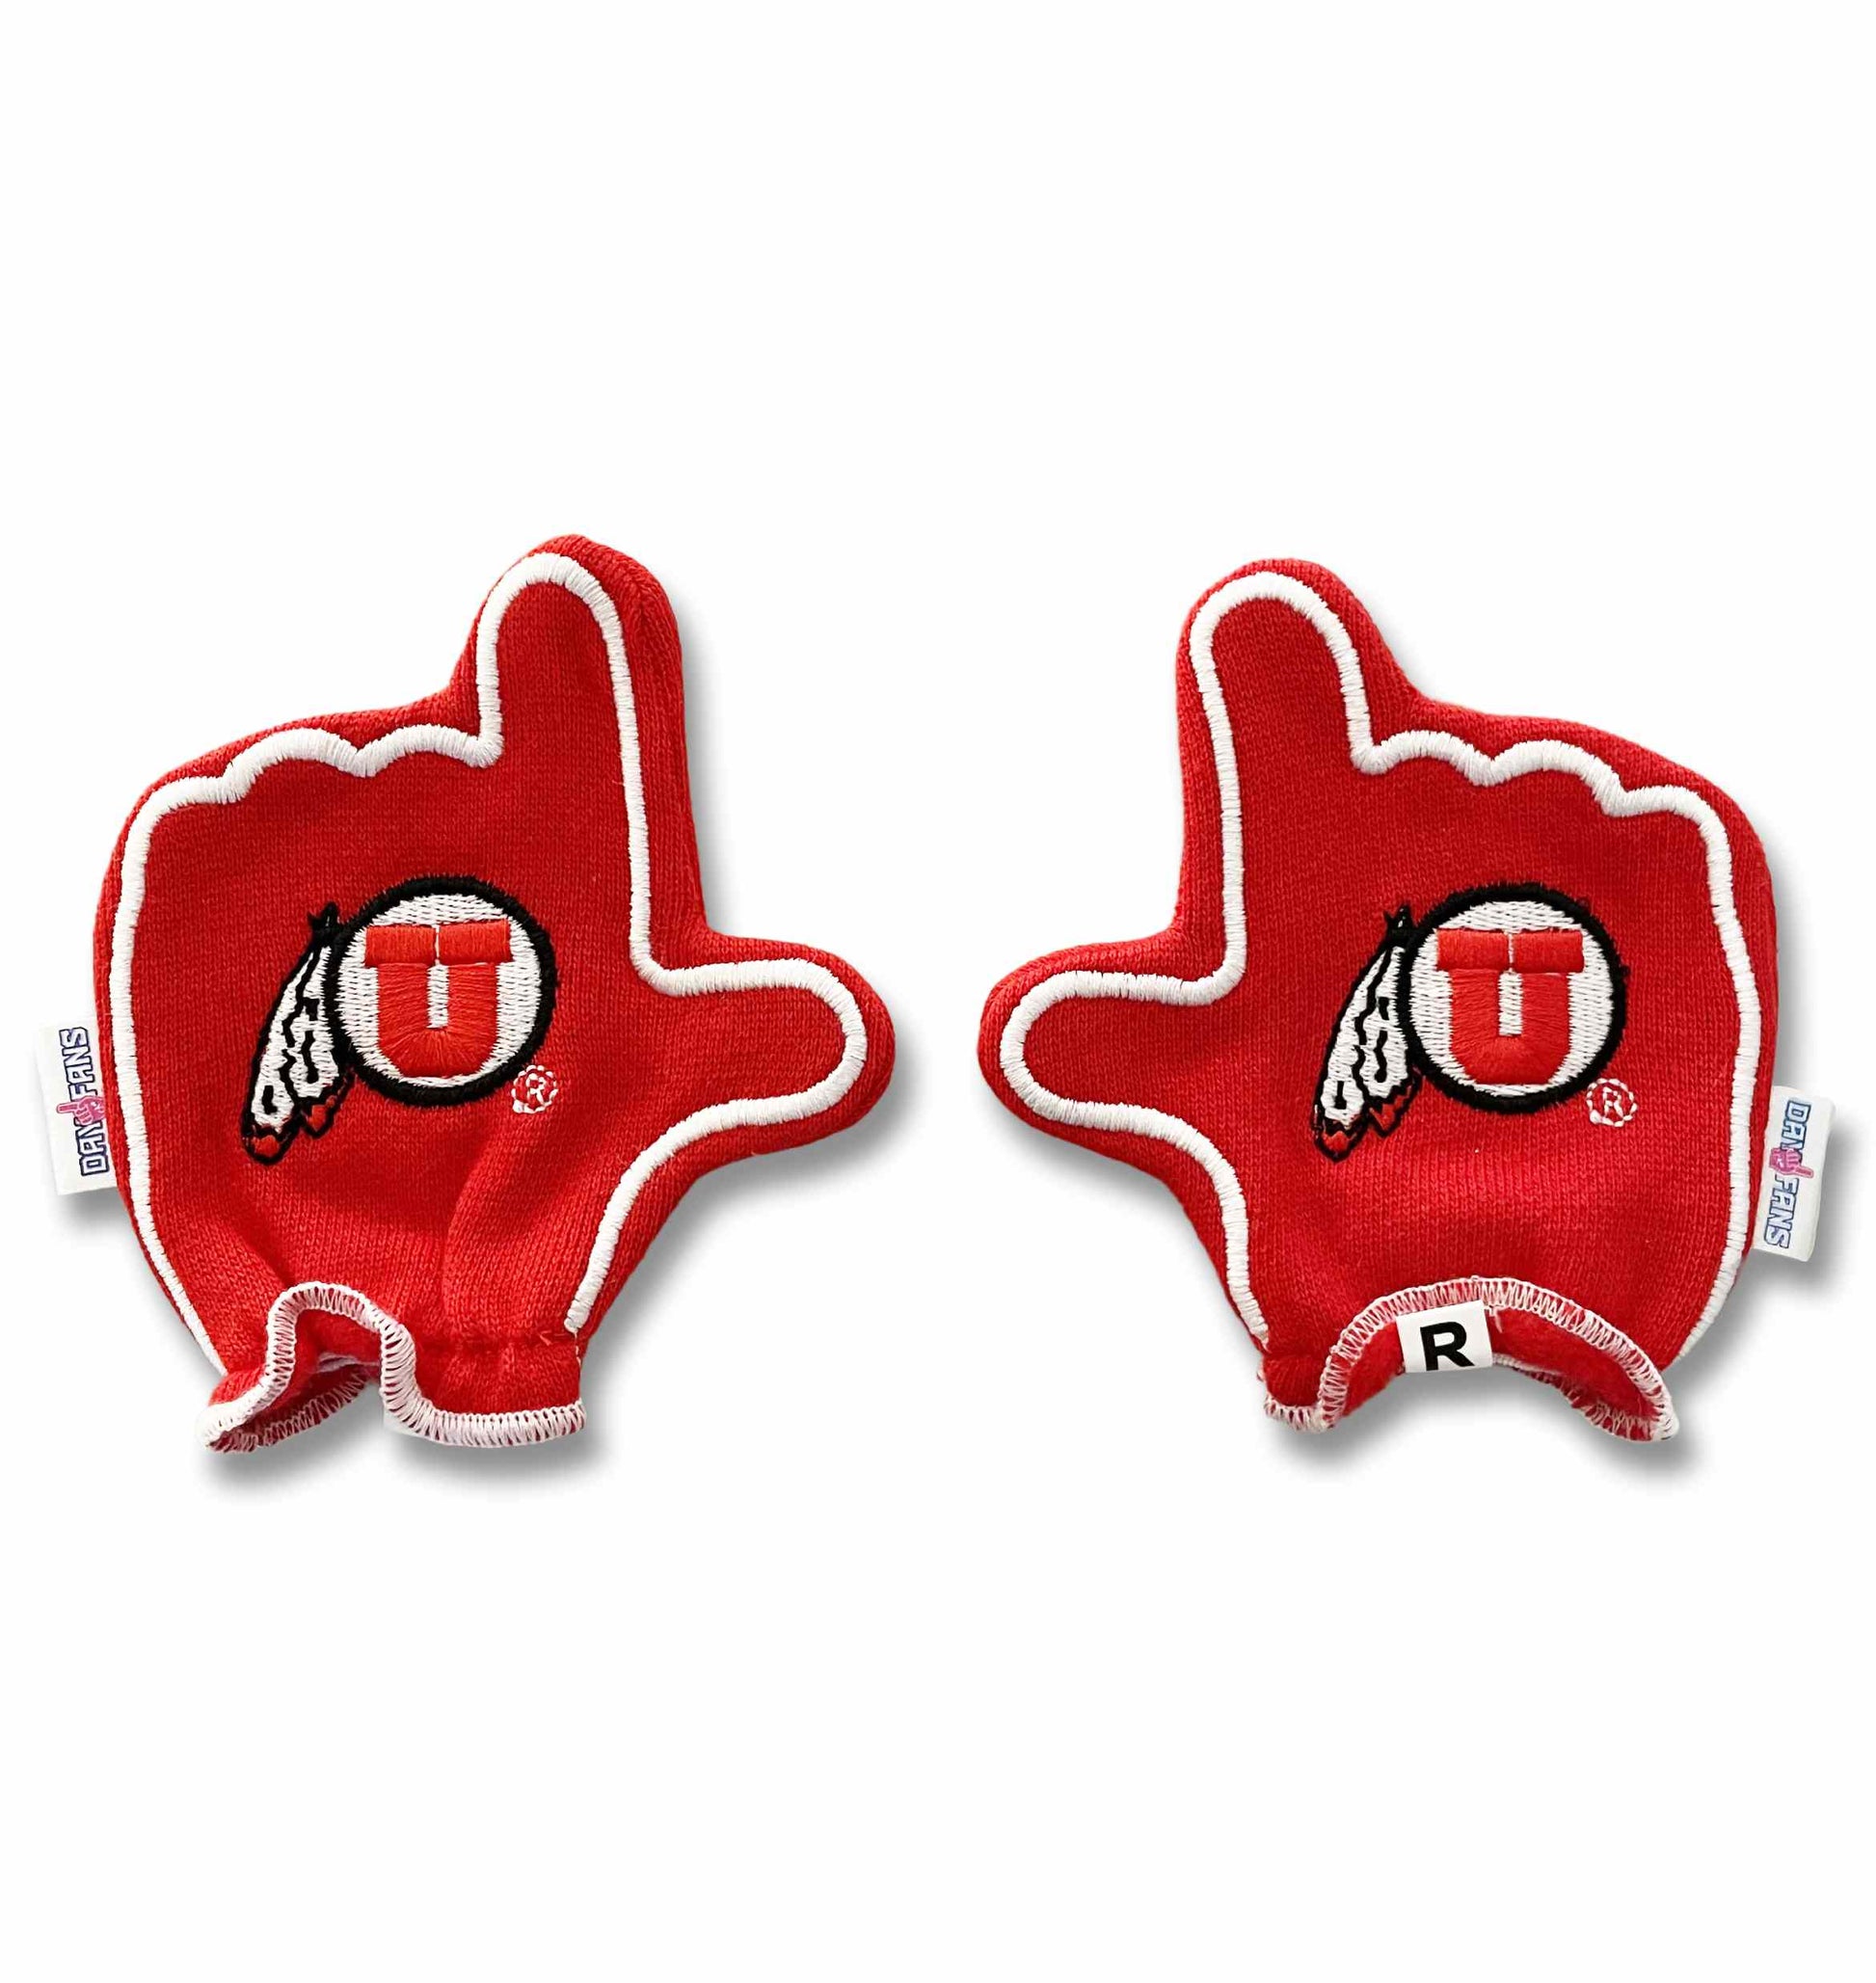 Utah Go Utes FanMitts Baby Mittens Red Back Pair